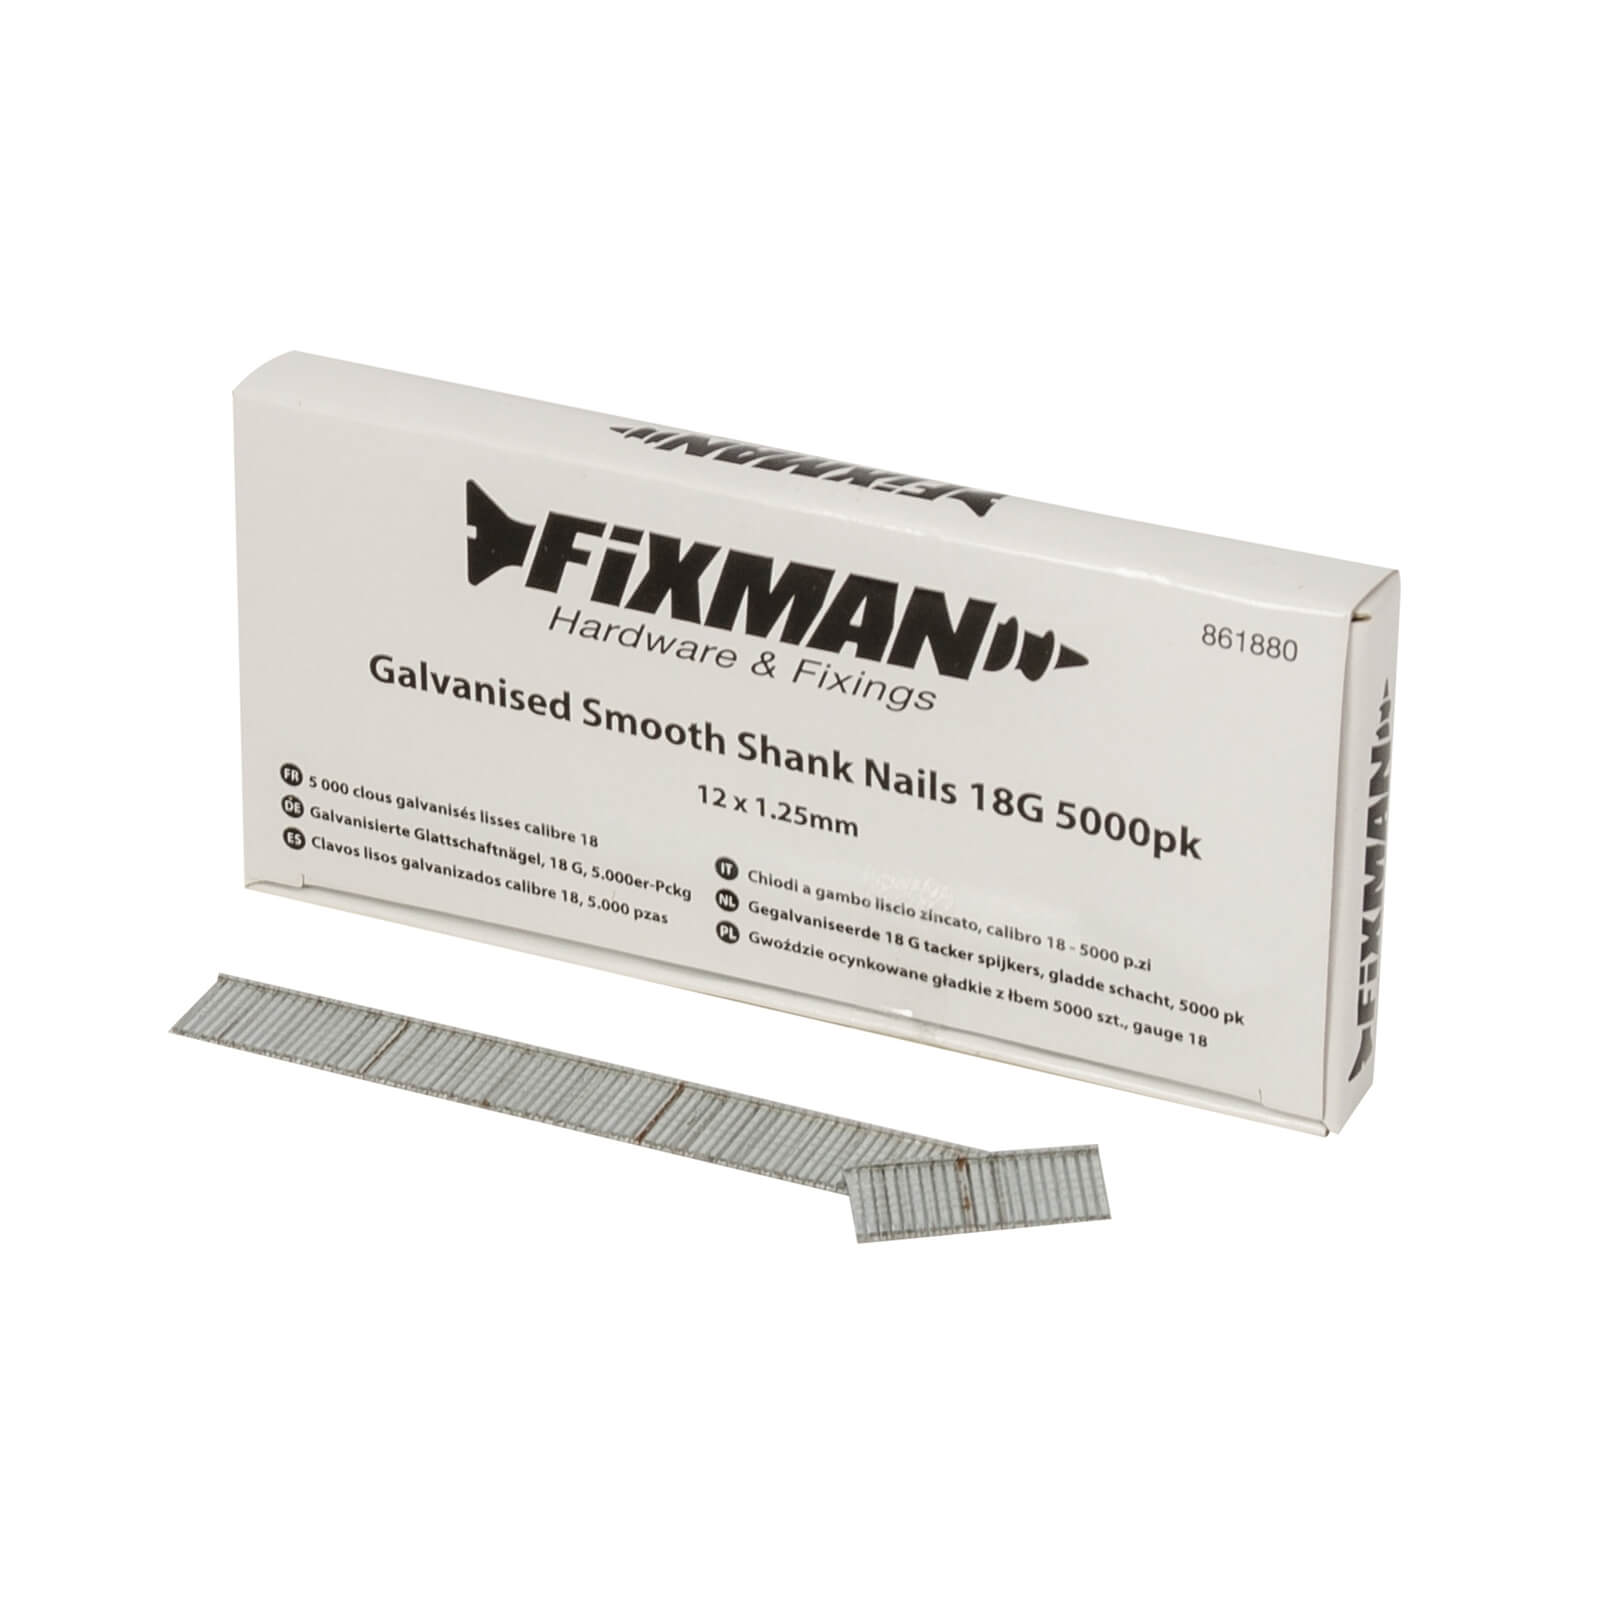 Fixman Galvanised Smooth Shank Nails 18G 5000 Pack 12 x 1.25mm